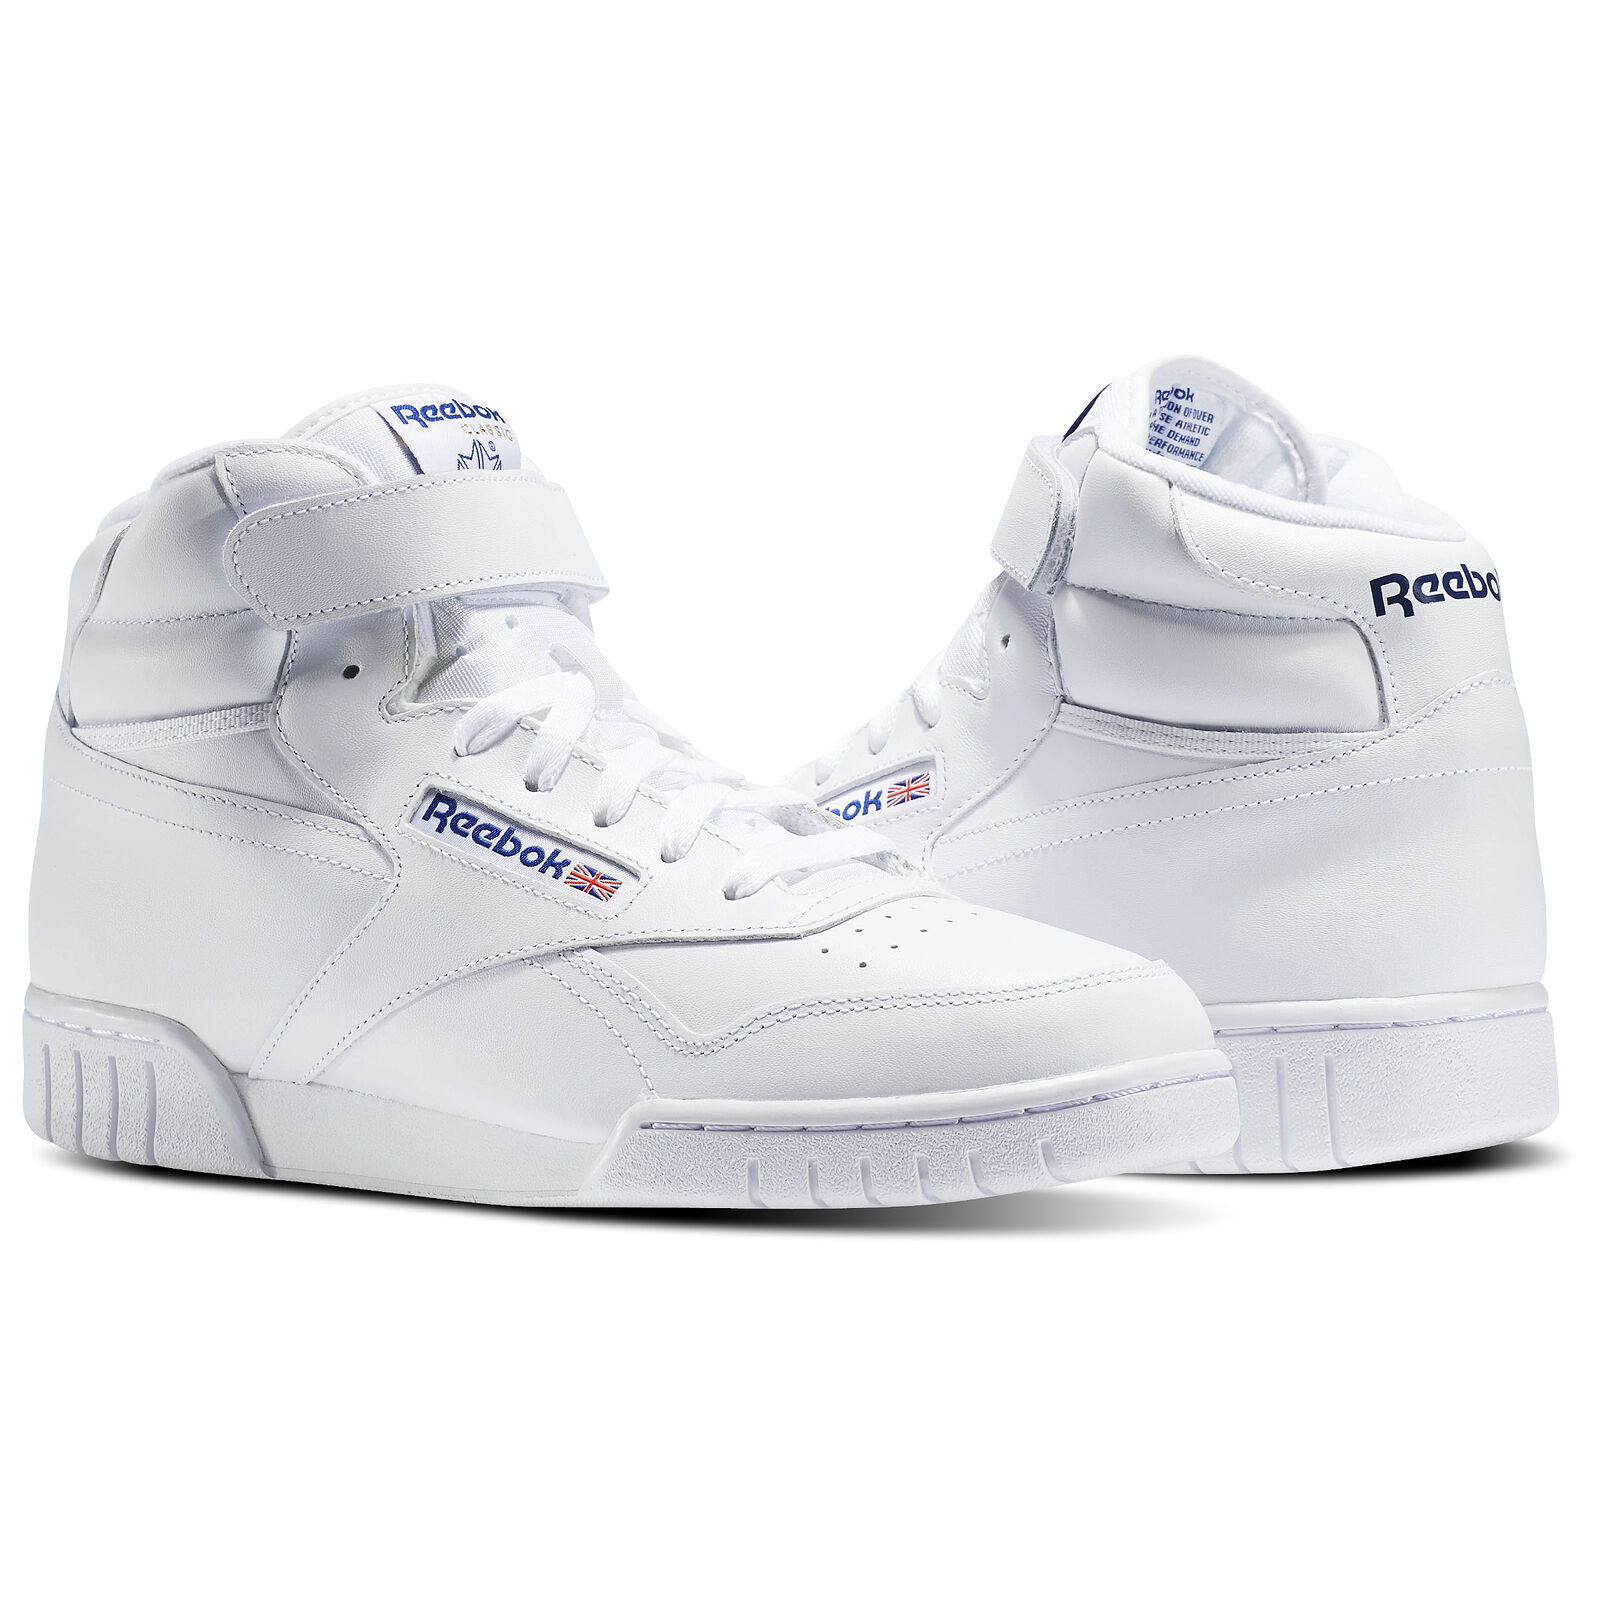 Up to 60% off Reebok Men’s Shoes | Buyandship SG | Shop Worldwide and ...